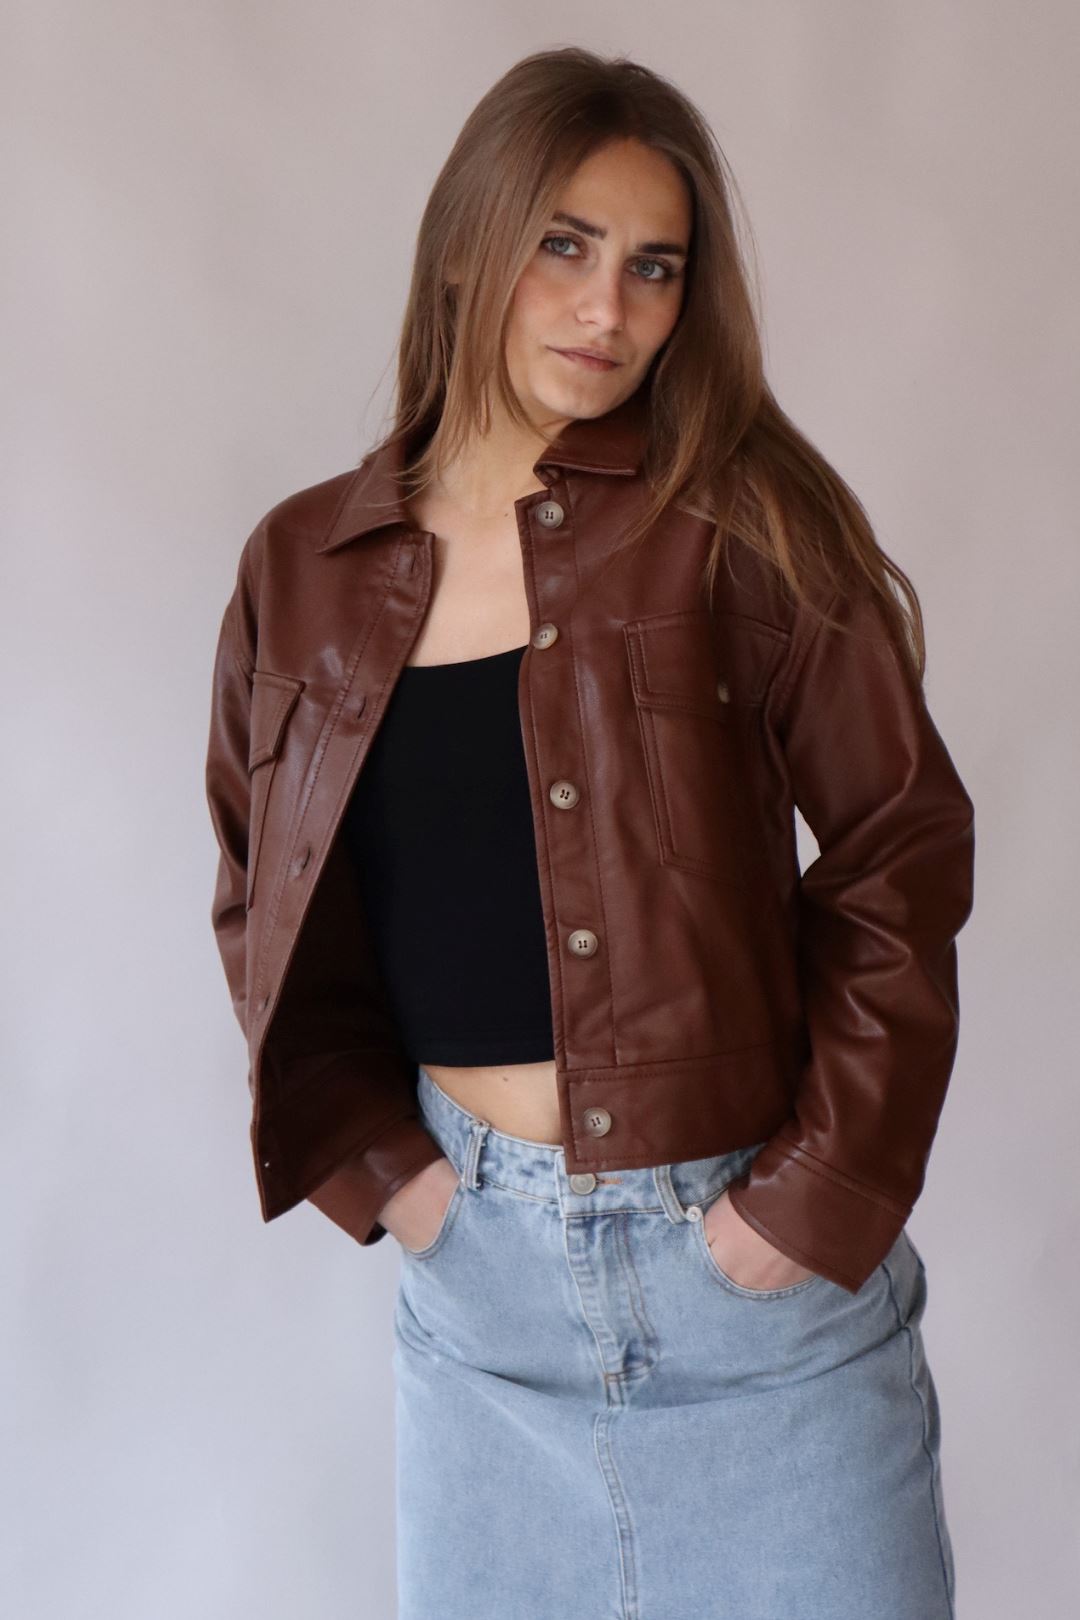 Tinsel Women's Faux Leather Flyaway Collar Jacket Brown Size Petite Small 